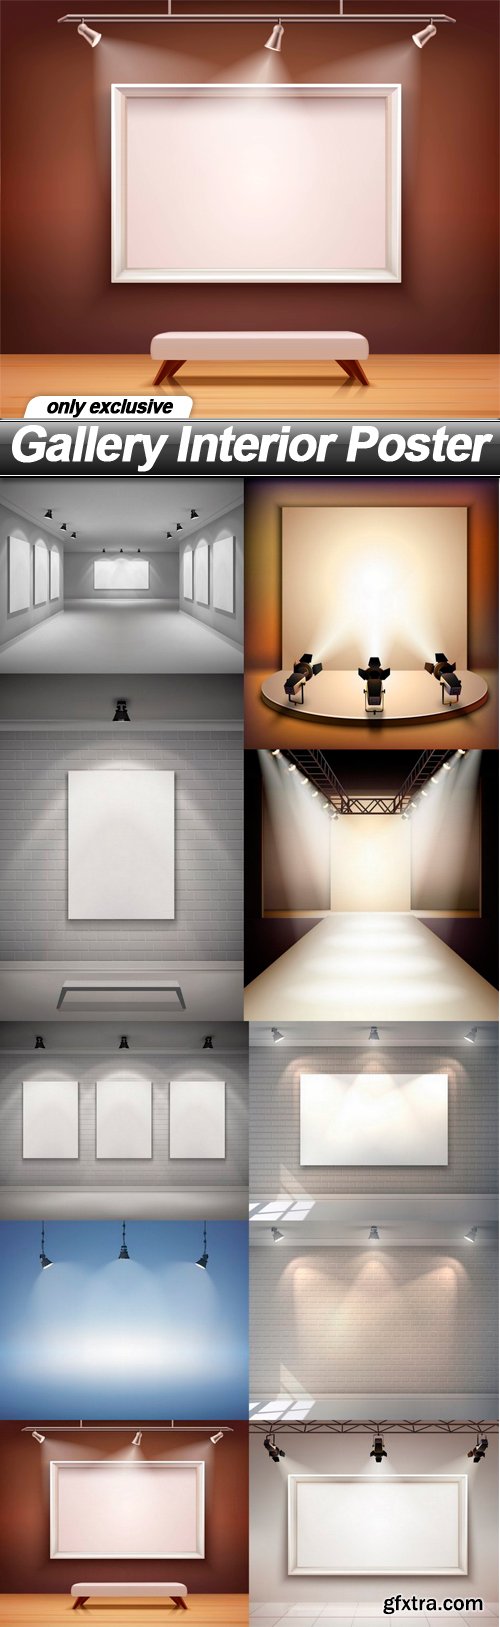 Gallery Interior Poster - 10 EPS